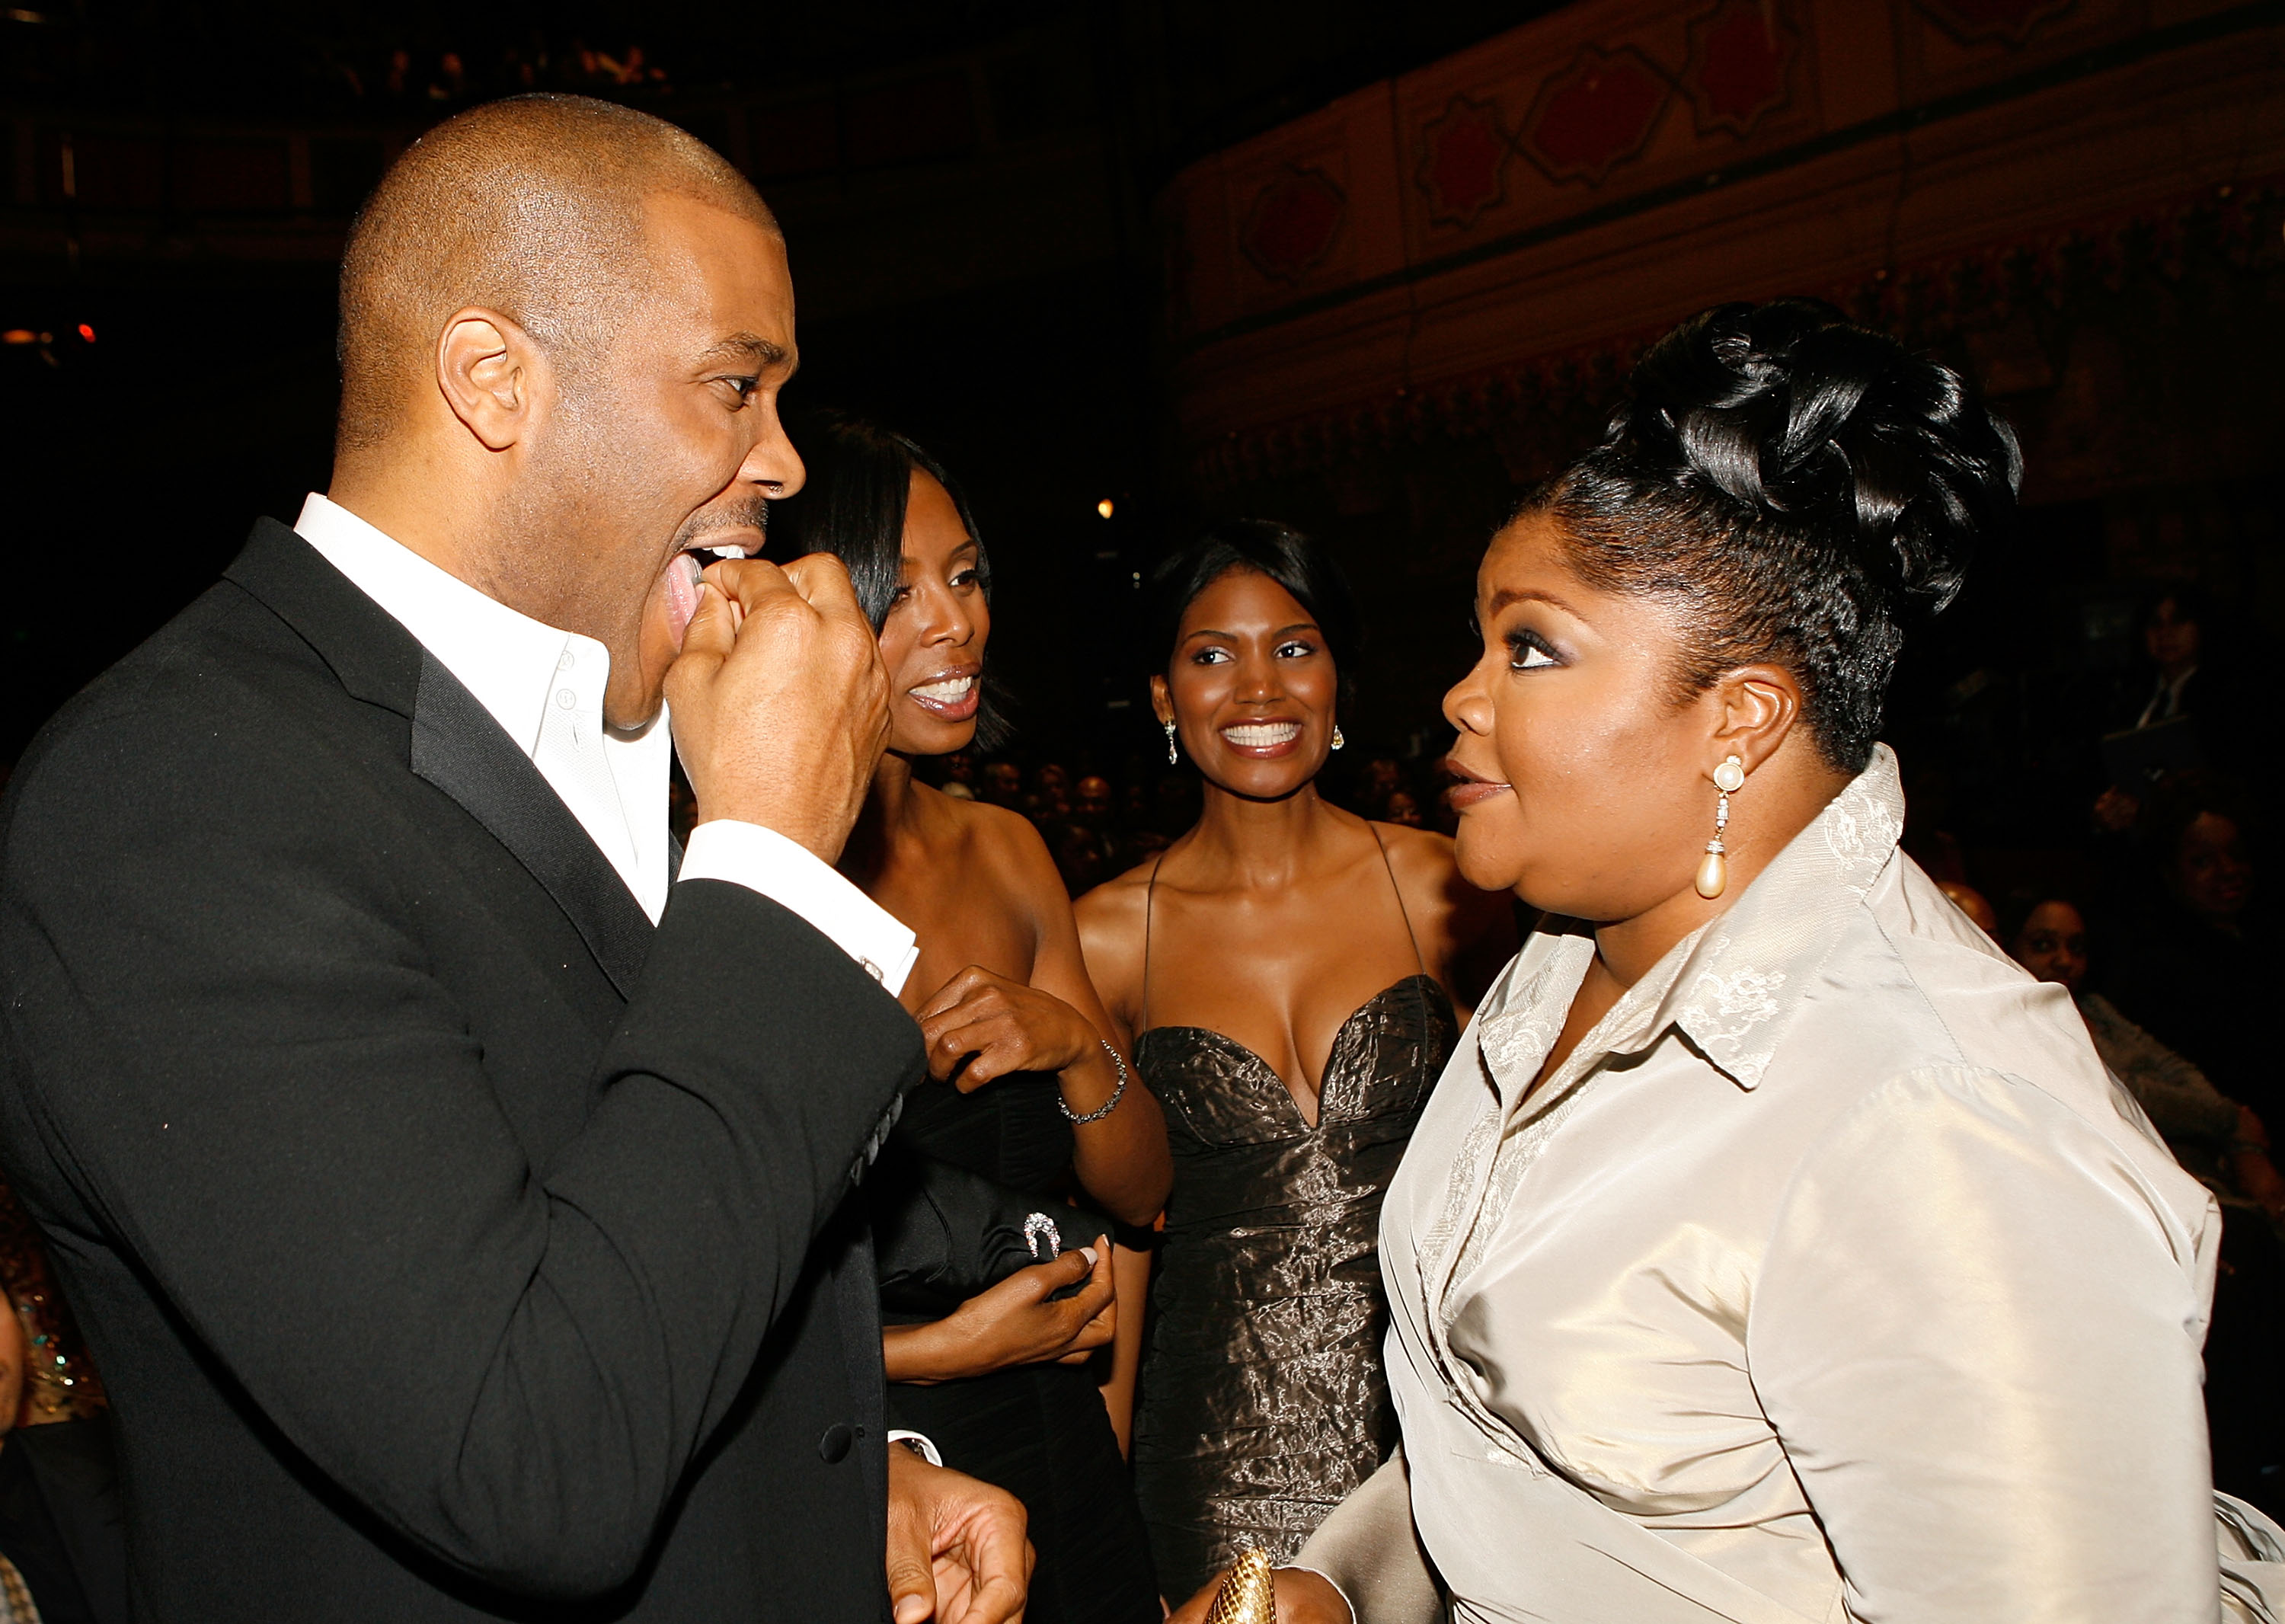 Producer/director/actor Tyler Perry (L) and comedian Mo'Nique talk in the audience during the 38th annual NAACP Image Awards held at the Shrine Auditorium on March 2, 2007 in Los Angeles, California